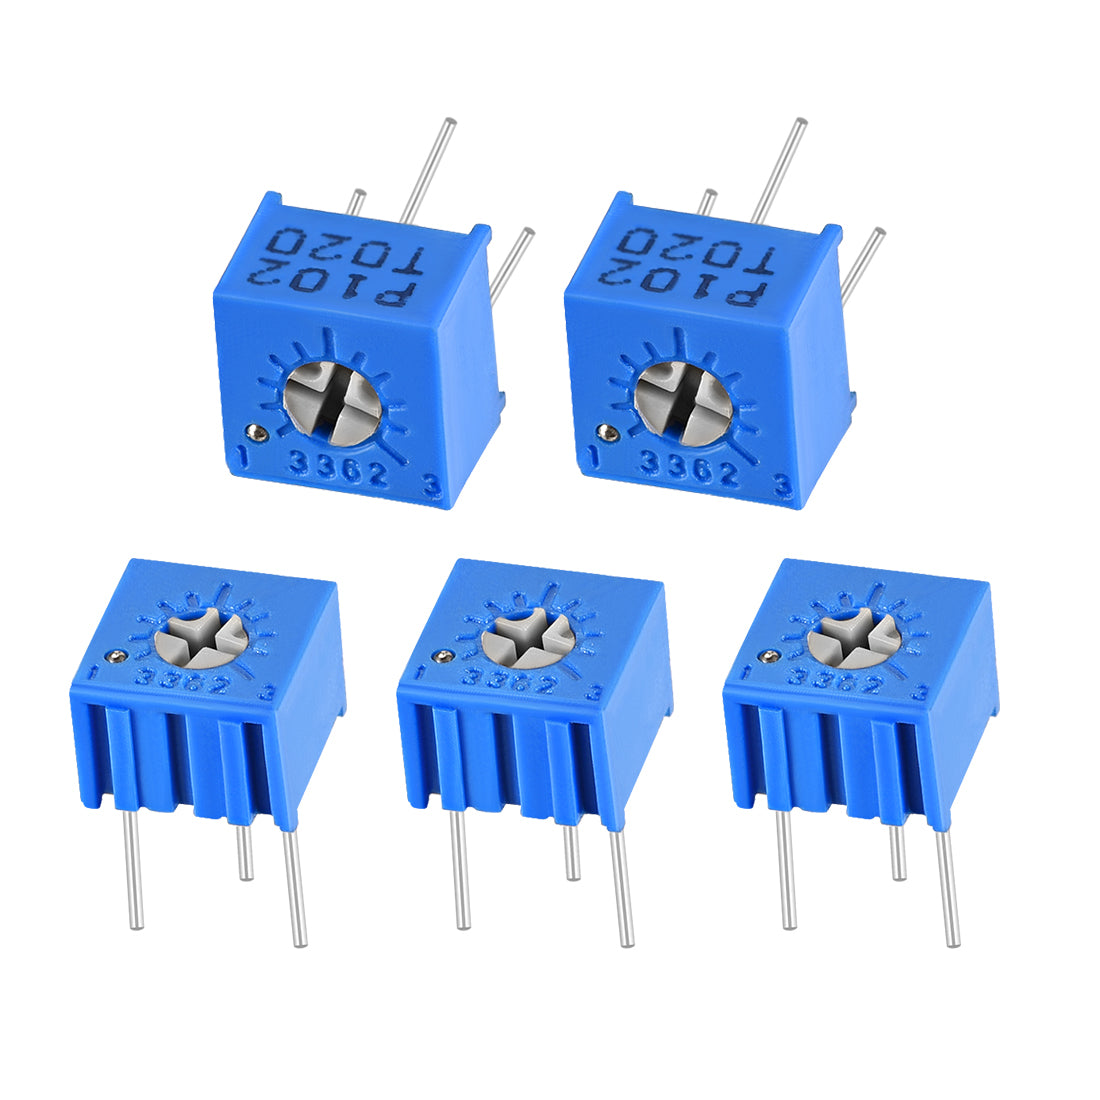 uxcell Uxcell 3362 Trimmer Potentiometer 1K Ohm Top Adjustment Horizontal Variable Resistors 5Pcs